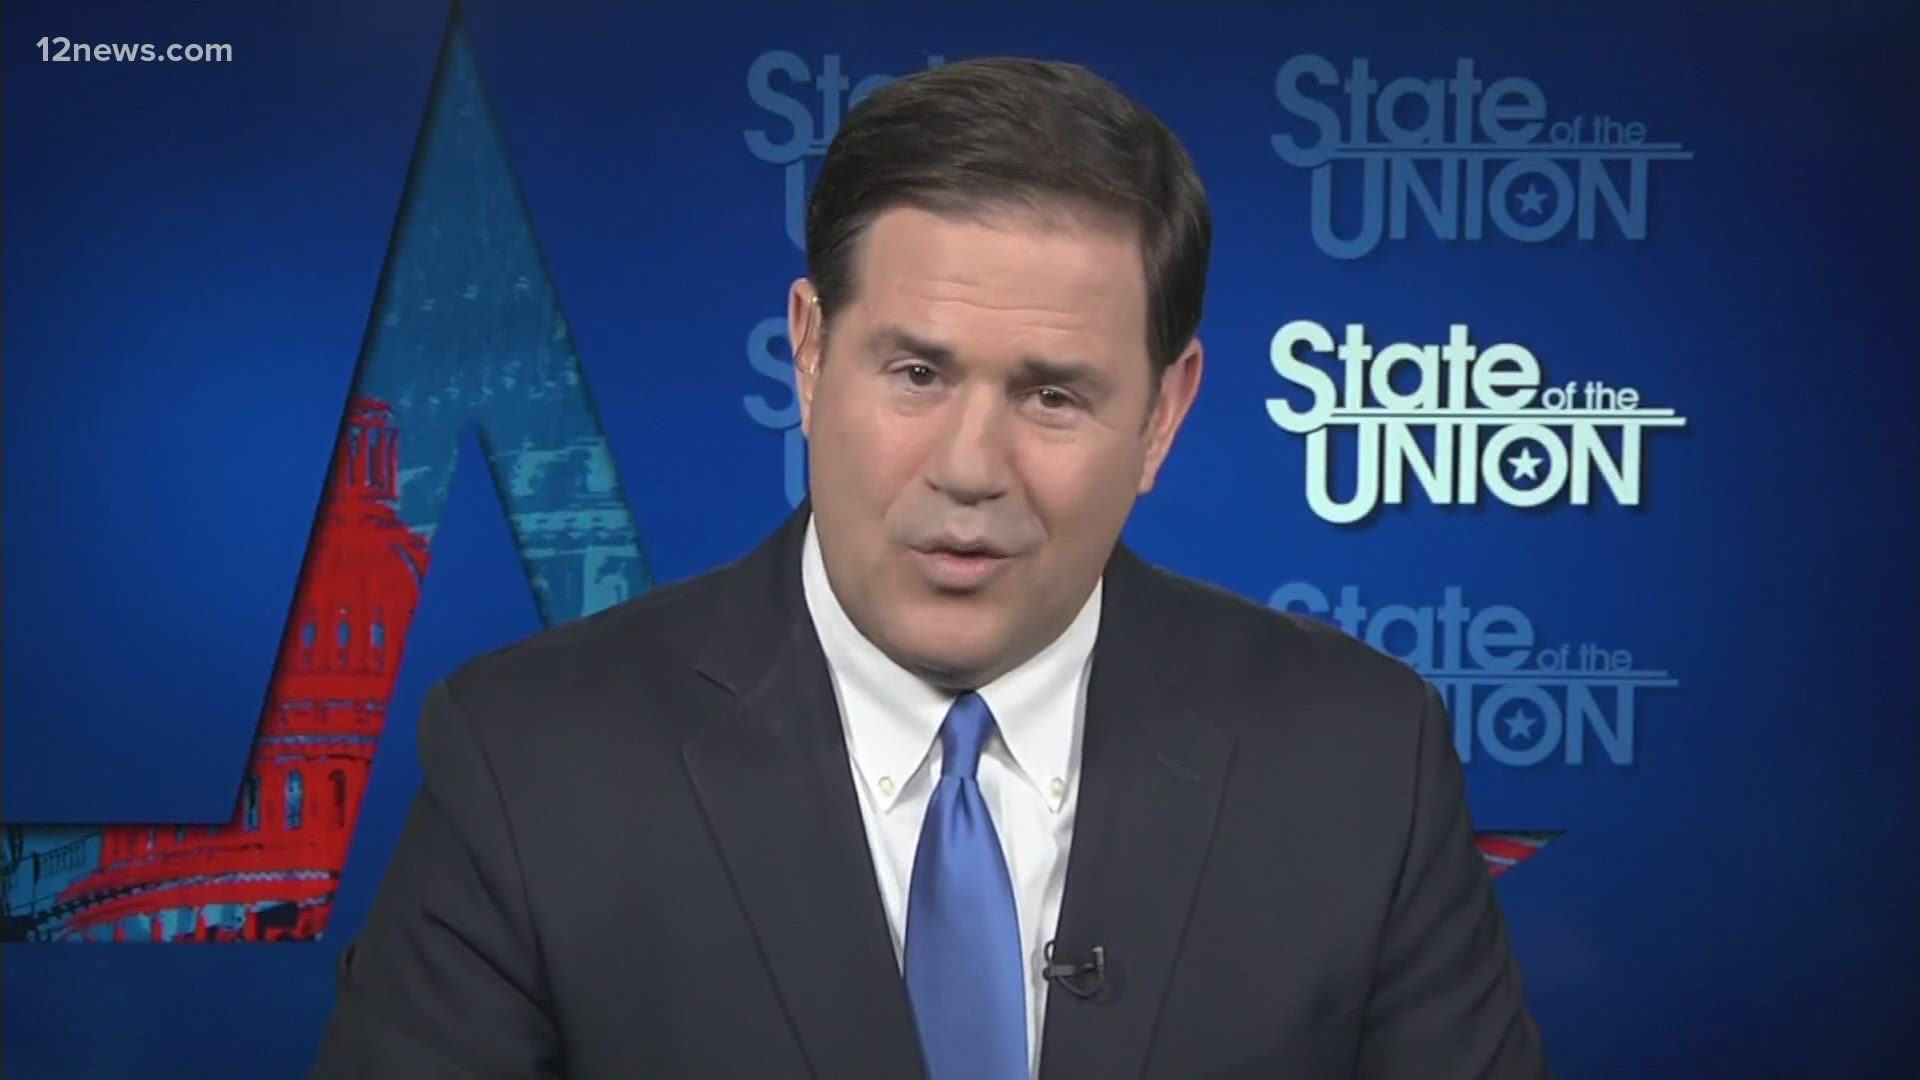 Governor Ducey is defending the state's record on COVID vaccinations on national TV. Ducey touted numbers suggesting Arizona is doing better than most states.